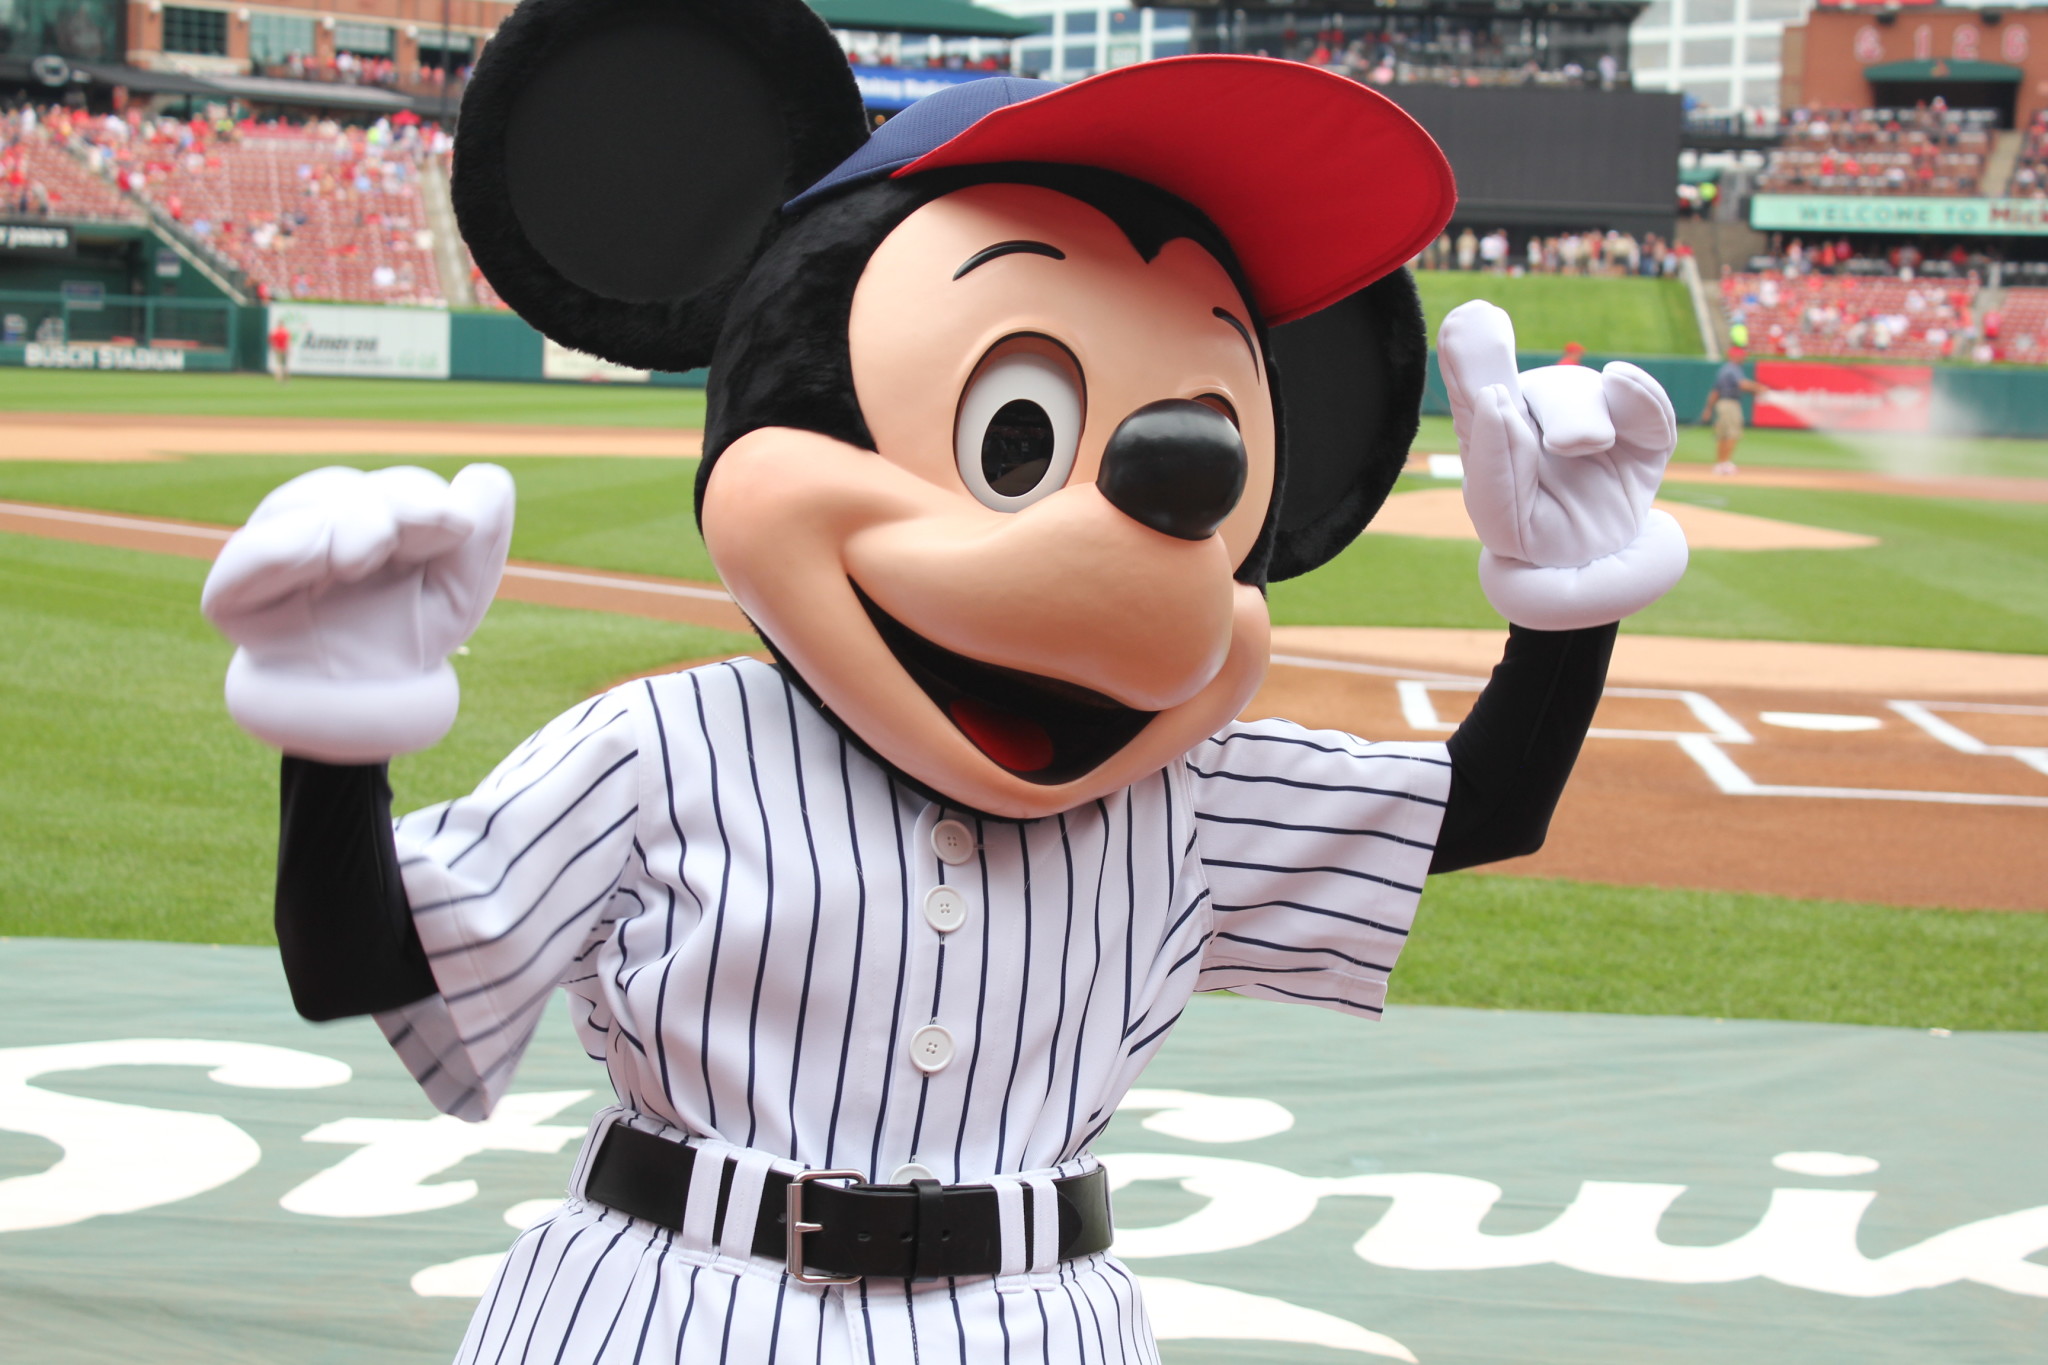 Disney’s TeamMickey All-Star Baseball Tour kicked off this weekend!